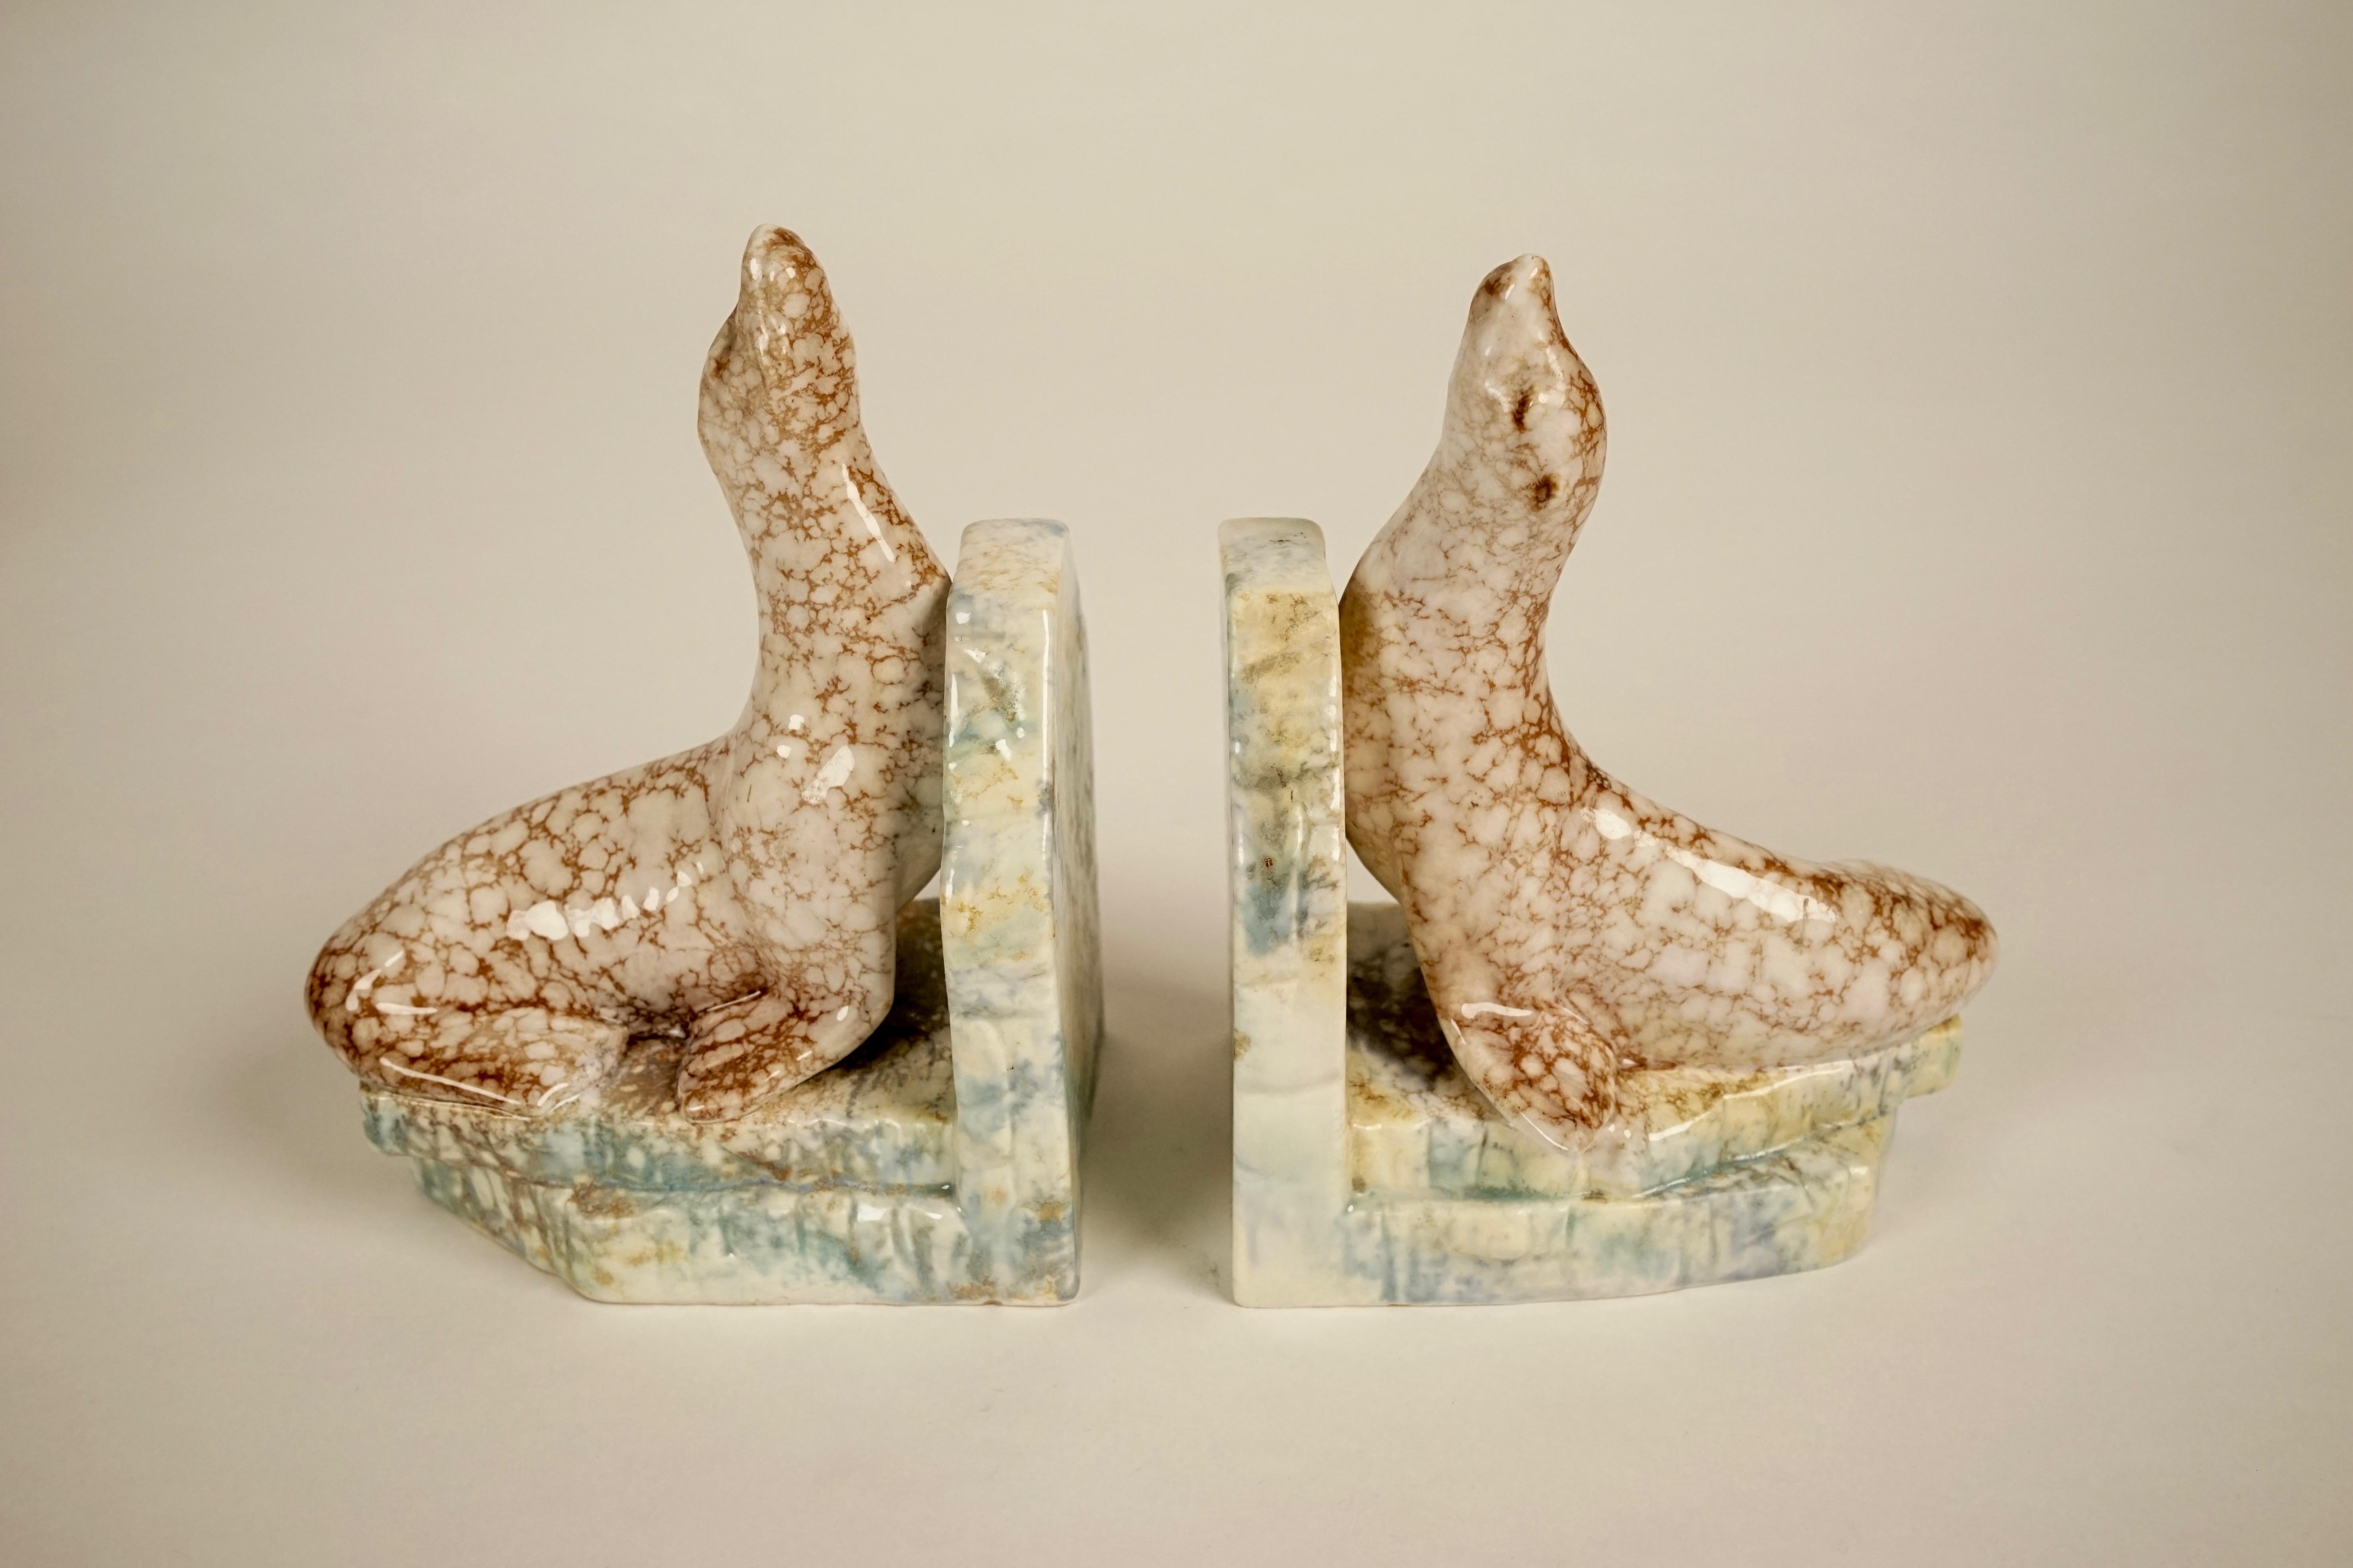 Pair of ceramic bookends from 1930s, produced in Czechoslovakia.
Bases are glazed in light green and yellow, the seals in brown and off white.